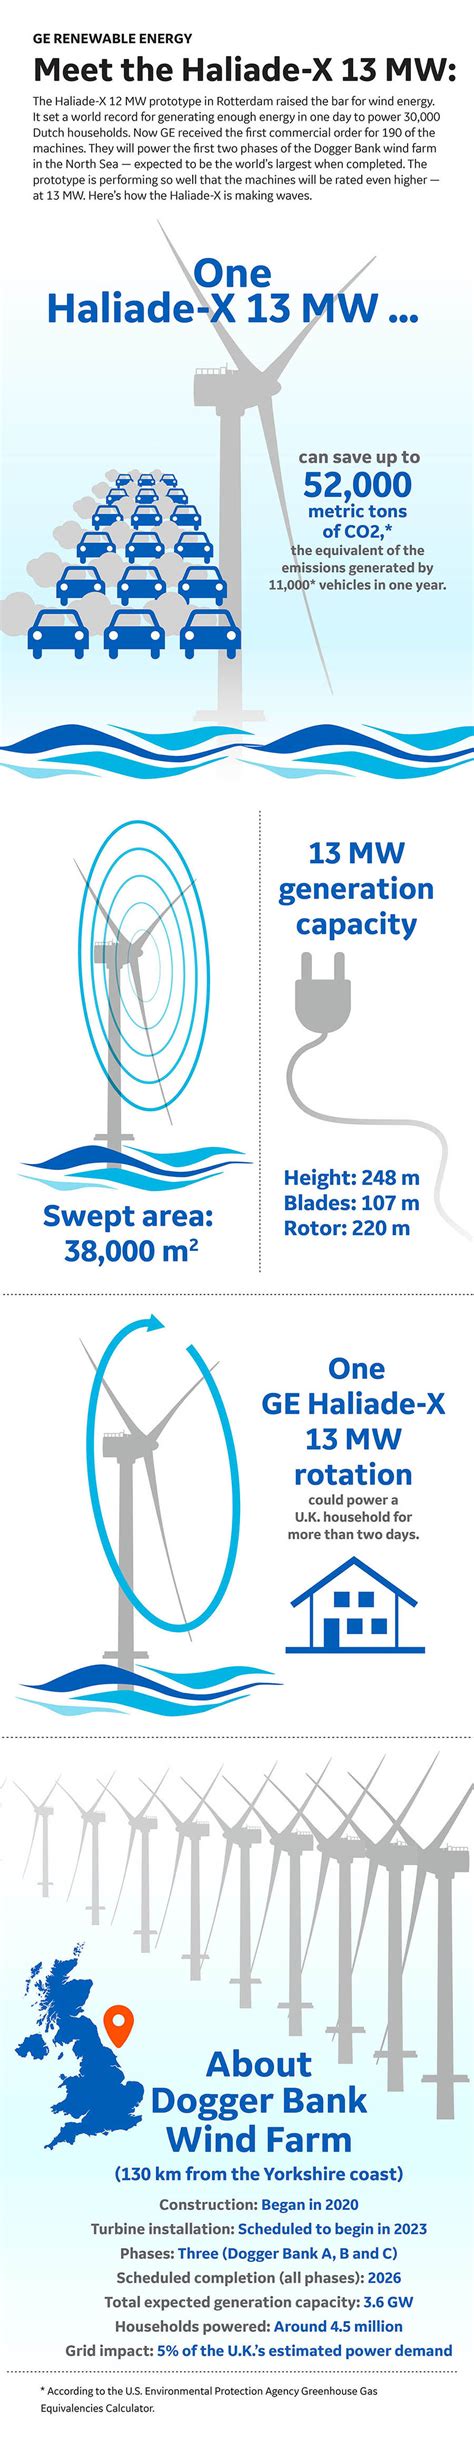 Turning Point Powerful Haliade X Offshore Wind Turbine Sets New Record